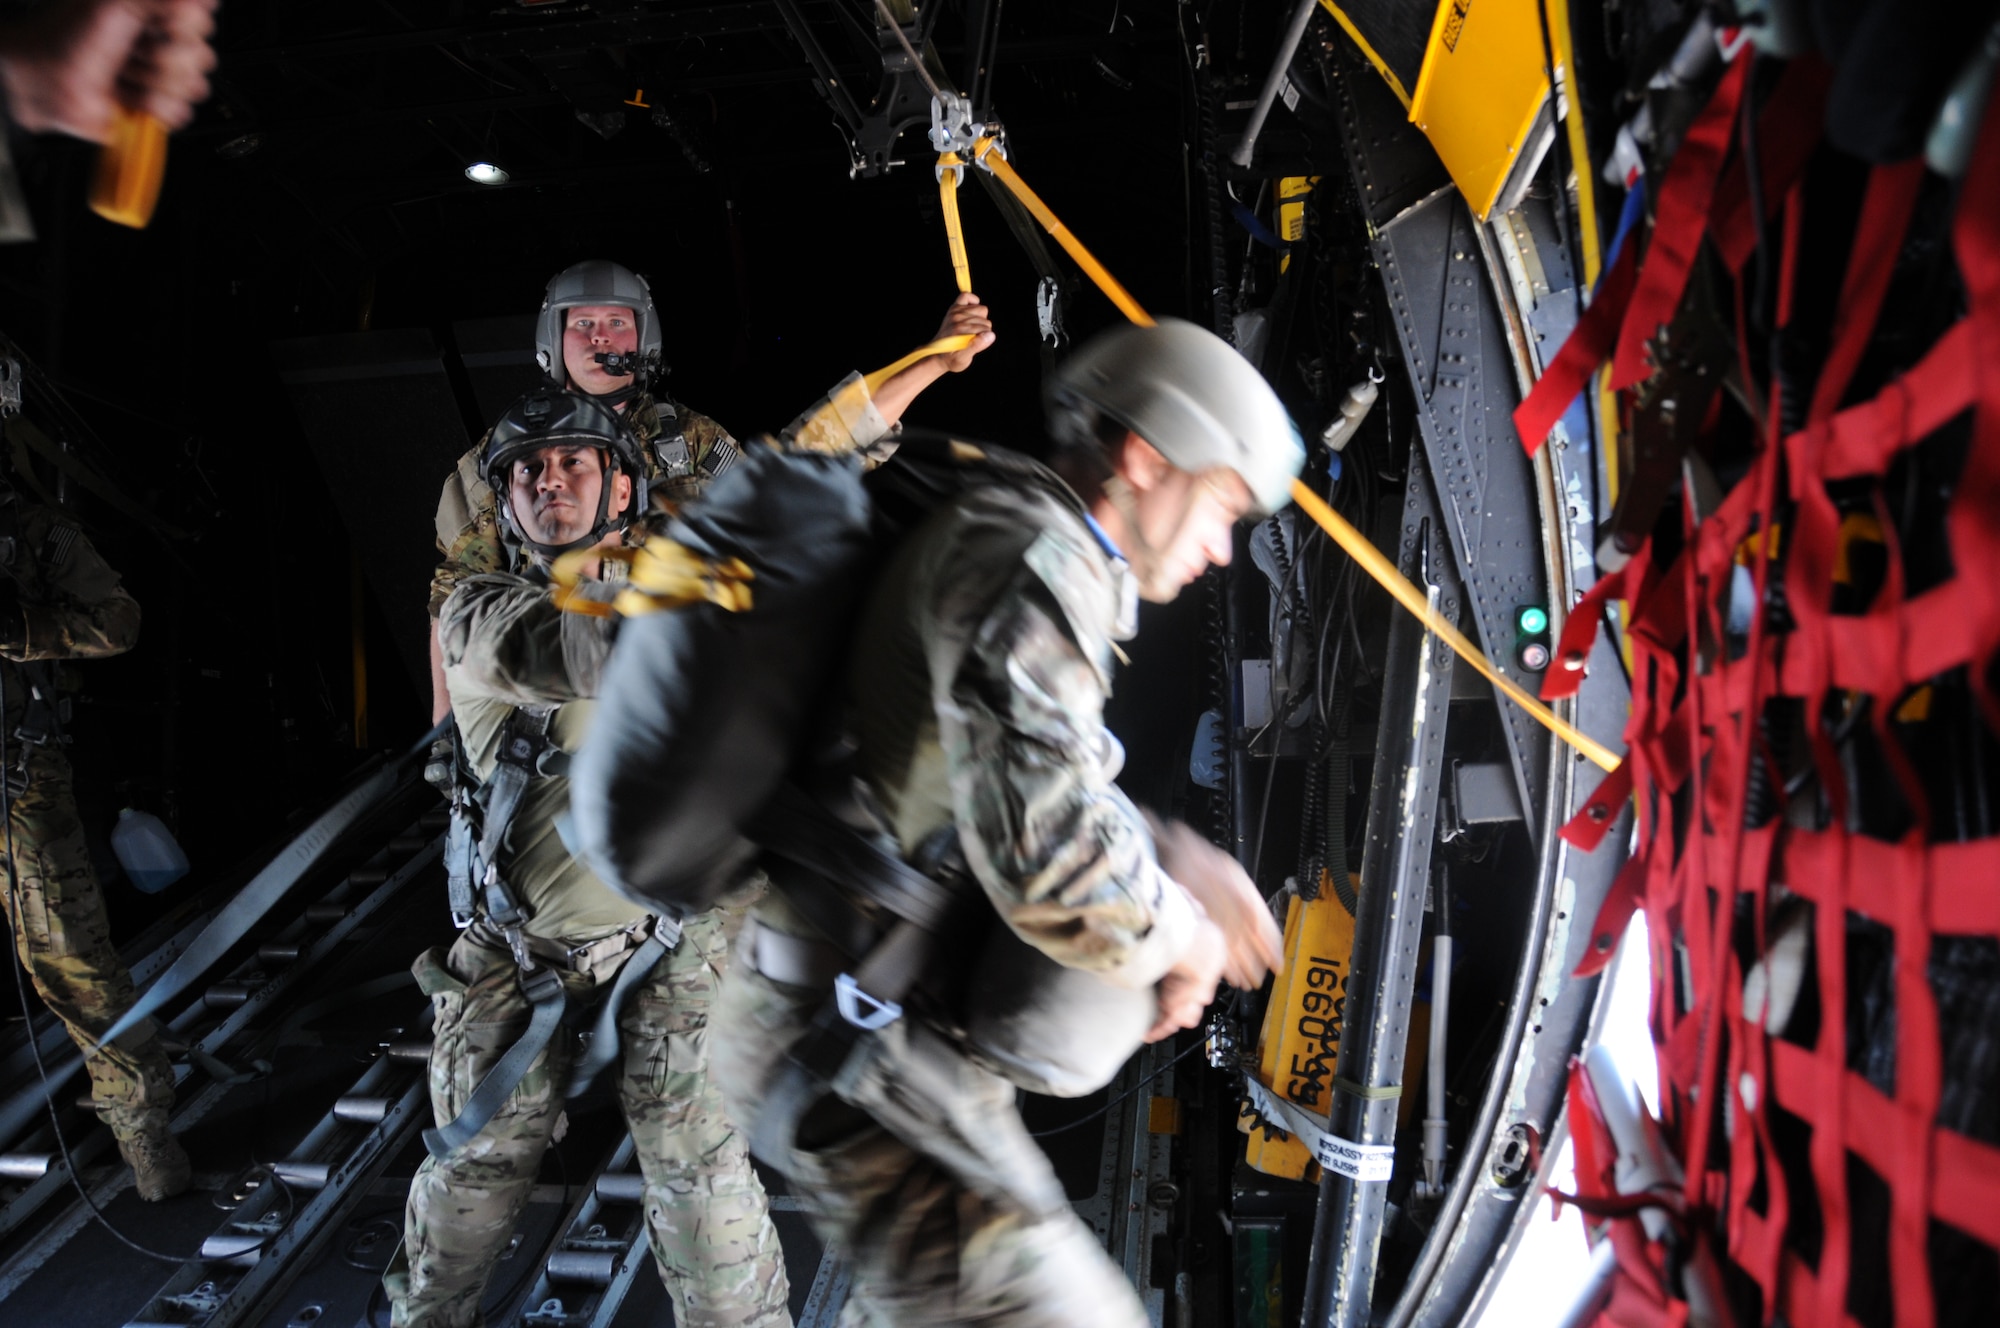 A 7th Special Forces Group jumpmaster directs paratroopers as they depart from a C-130 Hercules aircraft during a joint airborne operations training jump with the Honduran military at Soto Cano Air Base, Honduras on April 3, 2014.  .  The 1,500 foot static line jump allowed members from both nations to retain currency, while also strengthening the relationship between the U.S. and Honduran forces.  (Photo by U. S. Air National Guard Capt. Steven Stubbs)